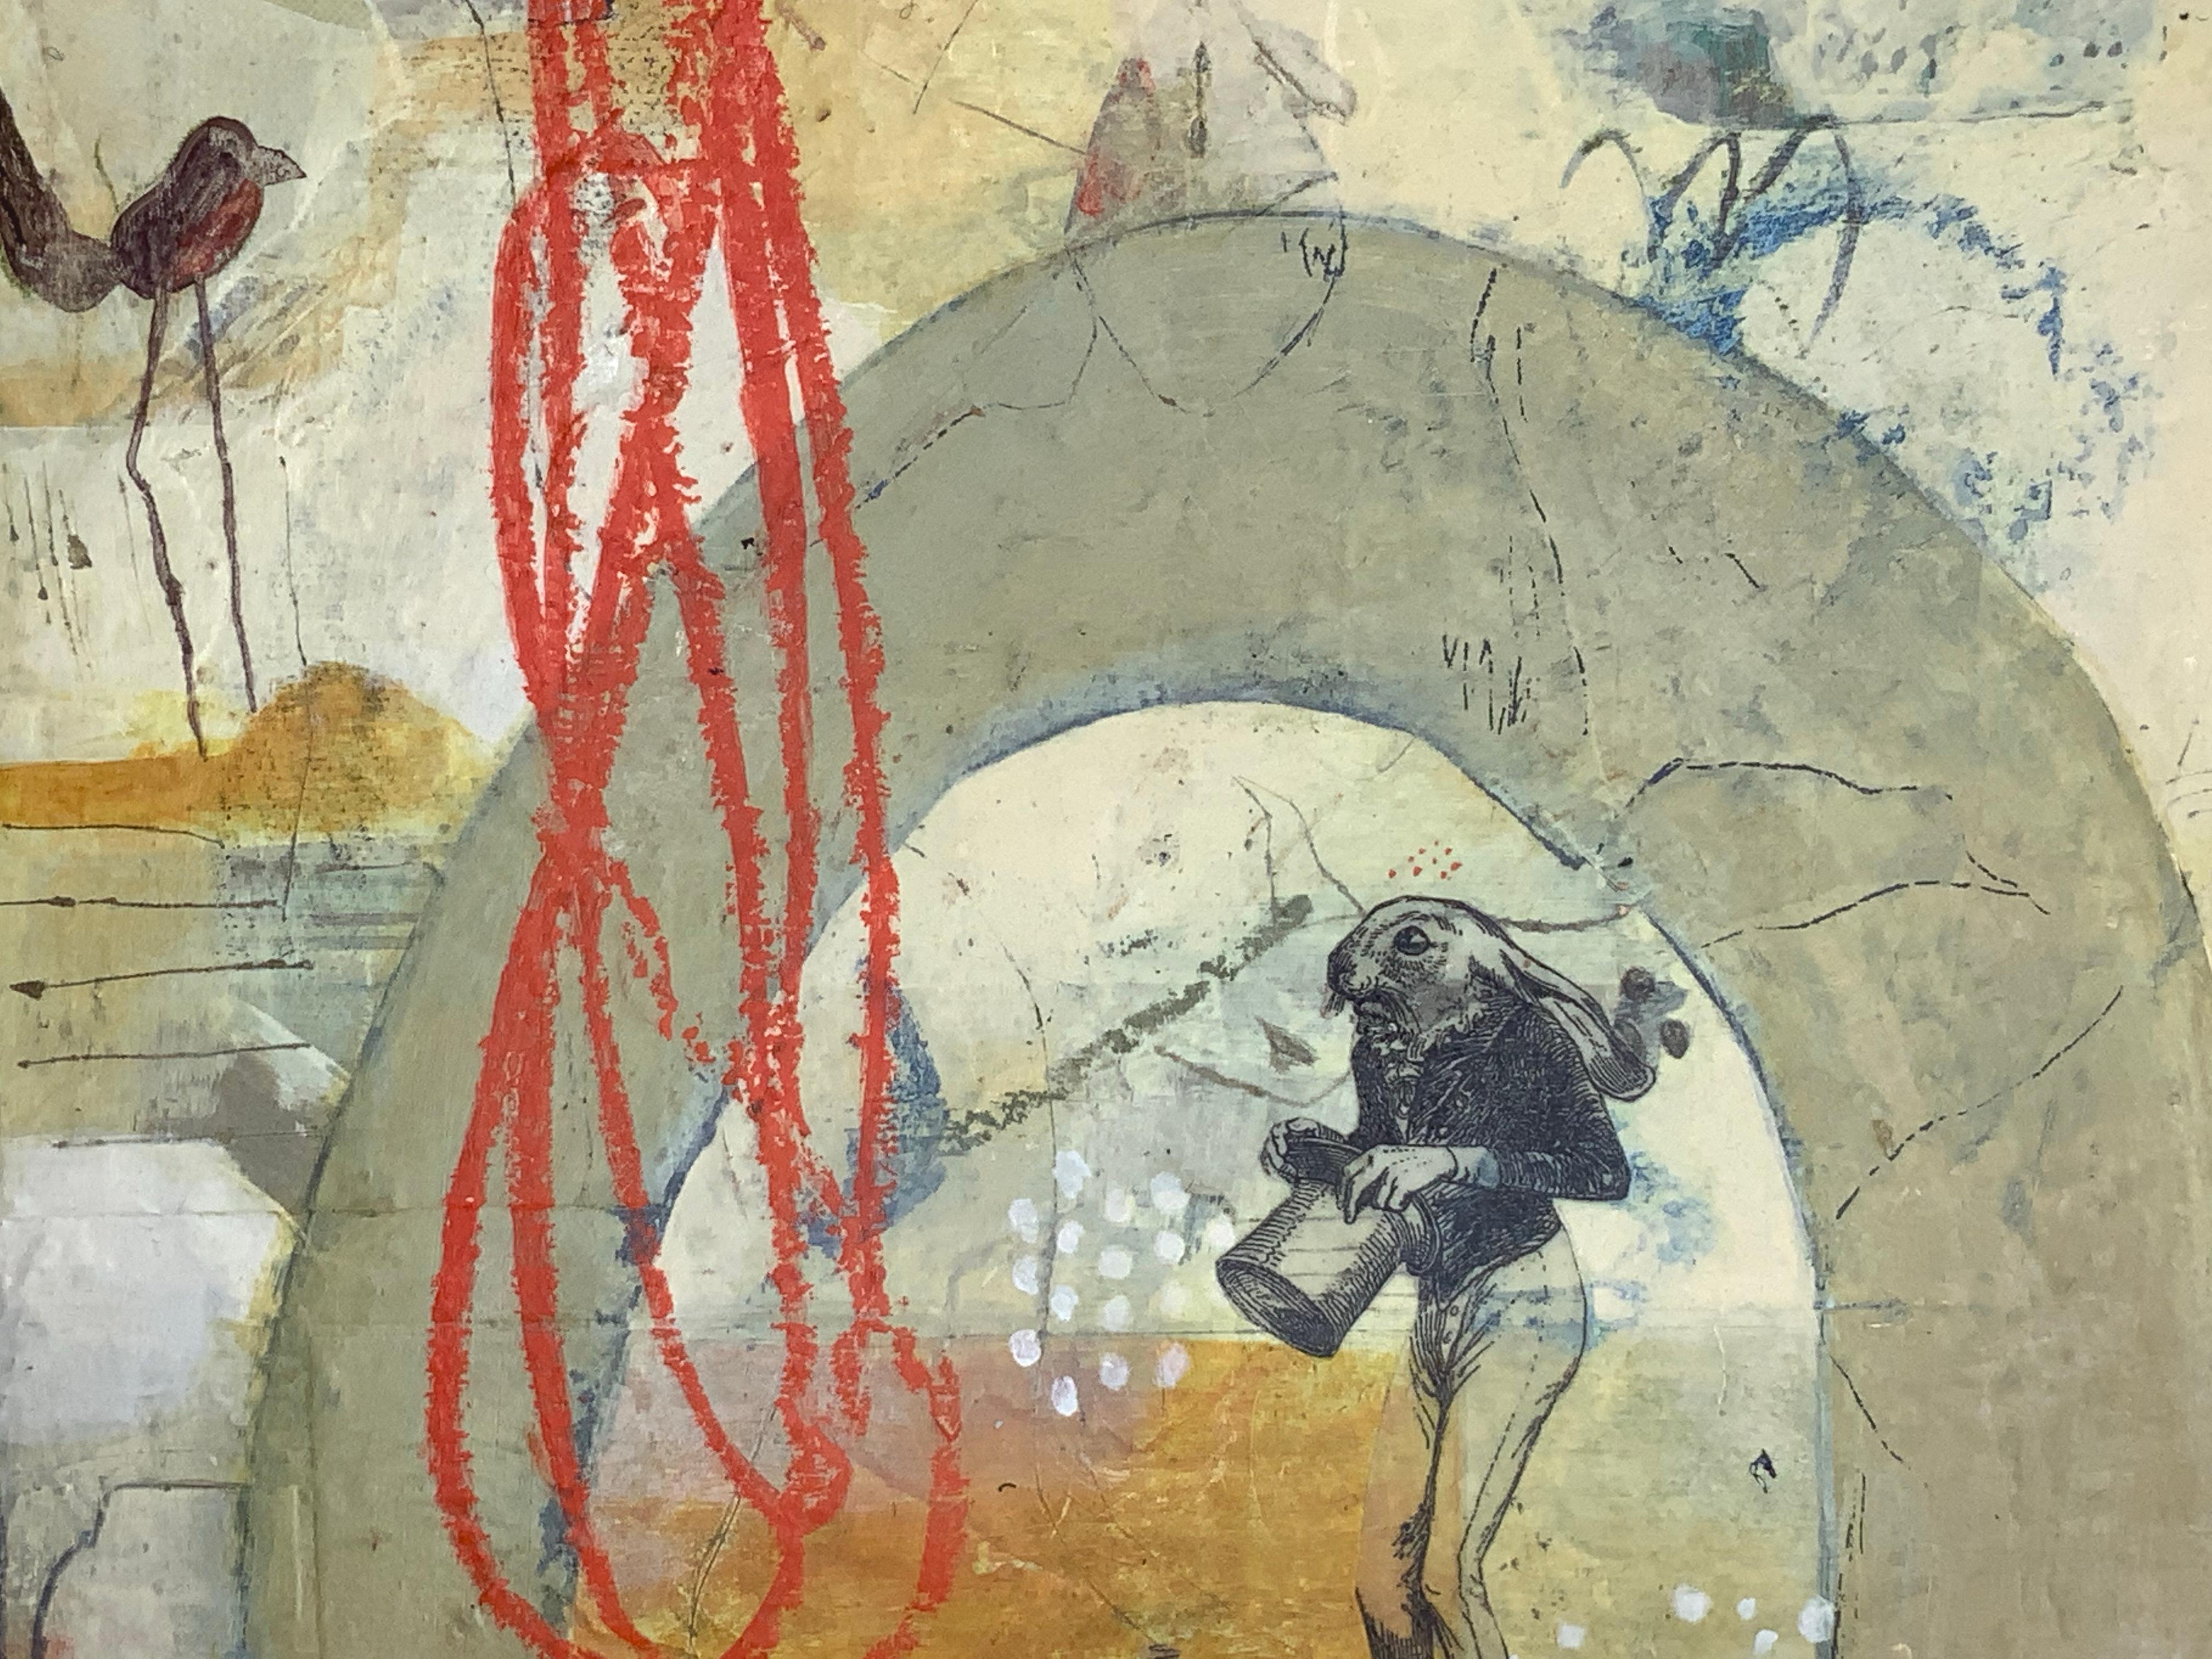 <p>Artist Comments<br>Artist Steph Gimson imagines an abstract vintage composition of a hare wearing a top hat and a suit with a long-legged crow. Part of her Whimsical collection explores fantasy themes and surrealism. She draws inspiration from